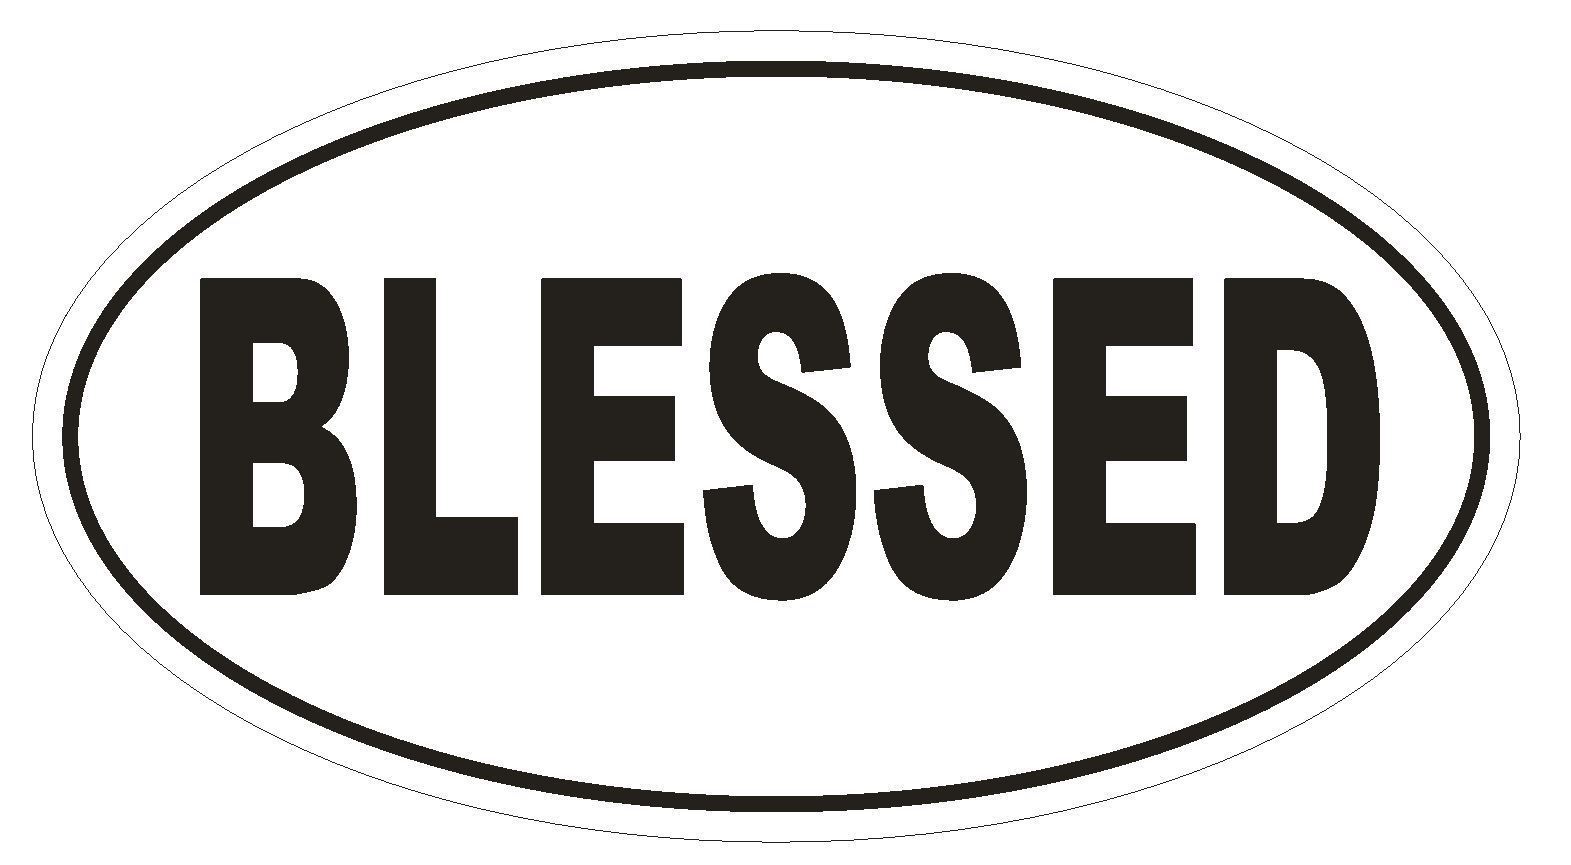 BLESSED Oval Bumper Sticker or Helmet Sticker D528 Laptop Cell Religious Euro - $1.39 - $75.00